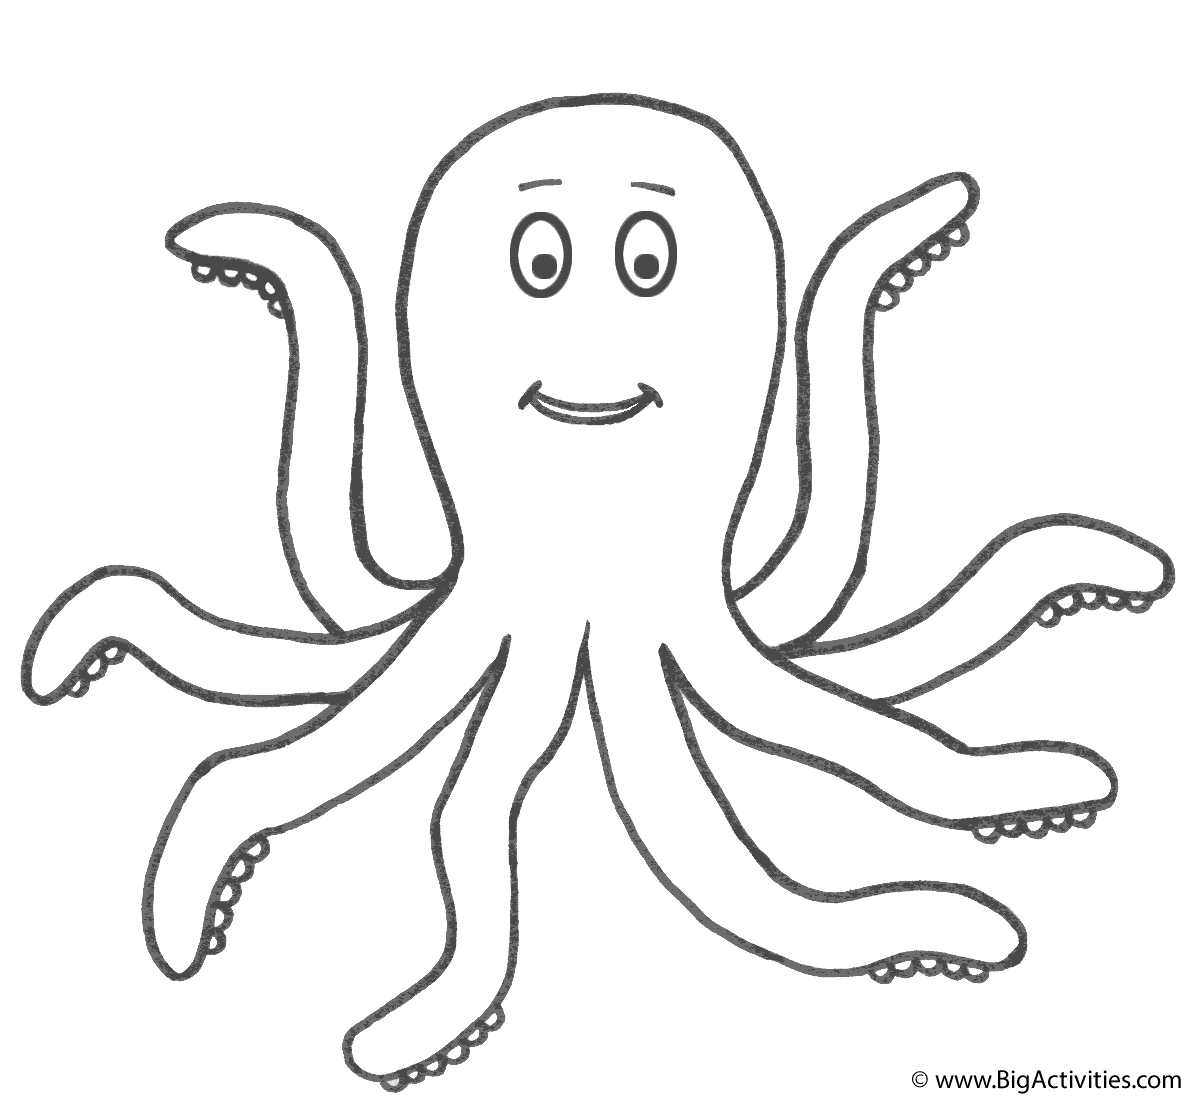 Colouring In Octopus